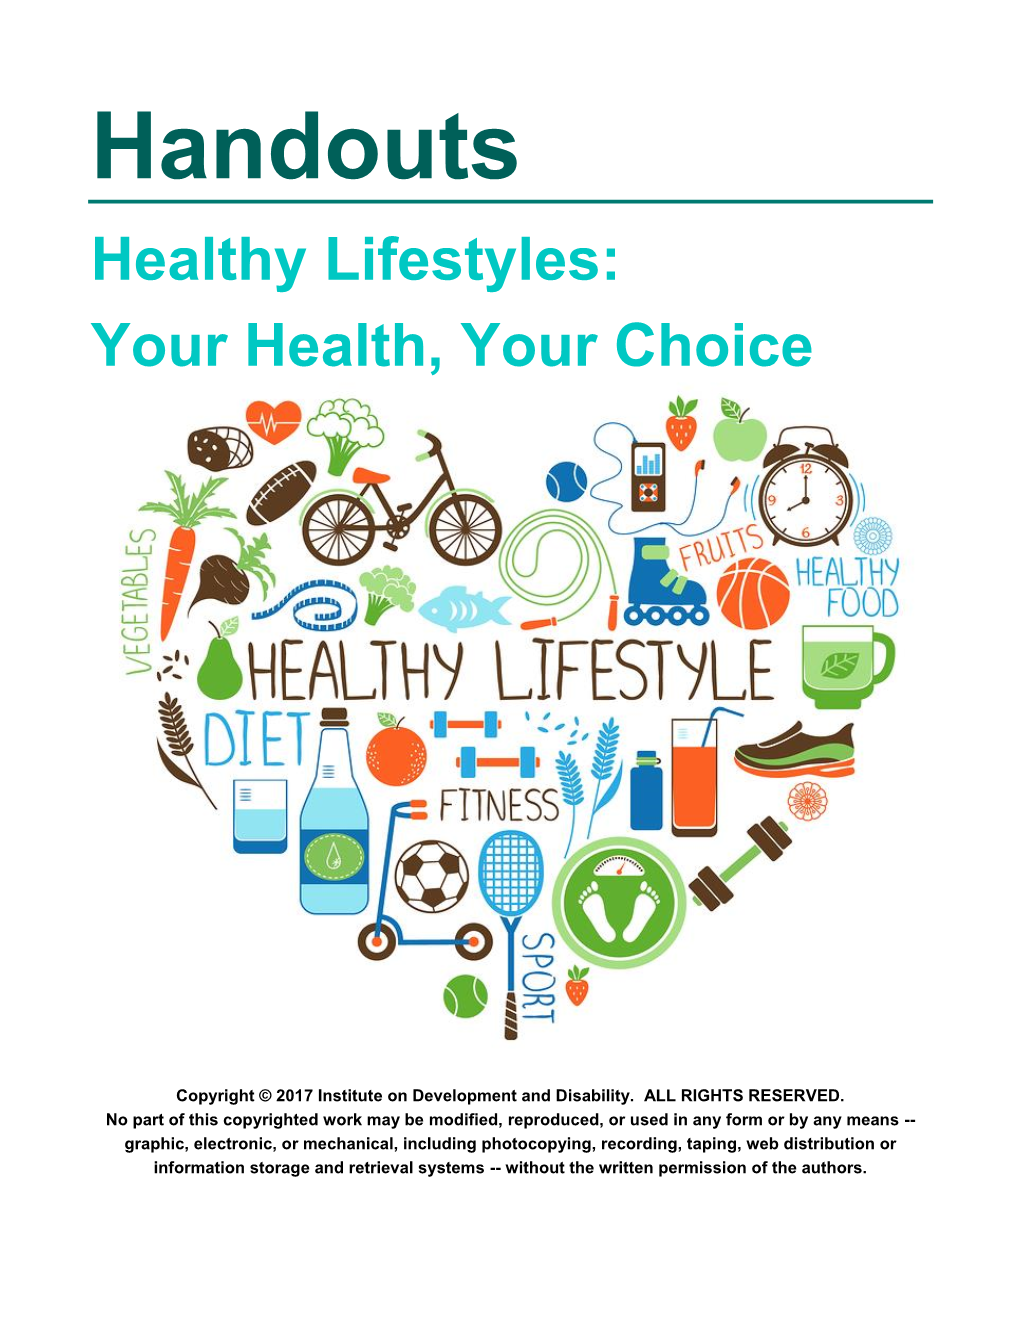 Handouts Healthy Lifestyles: Your Health, Your Choice